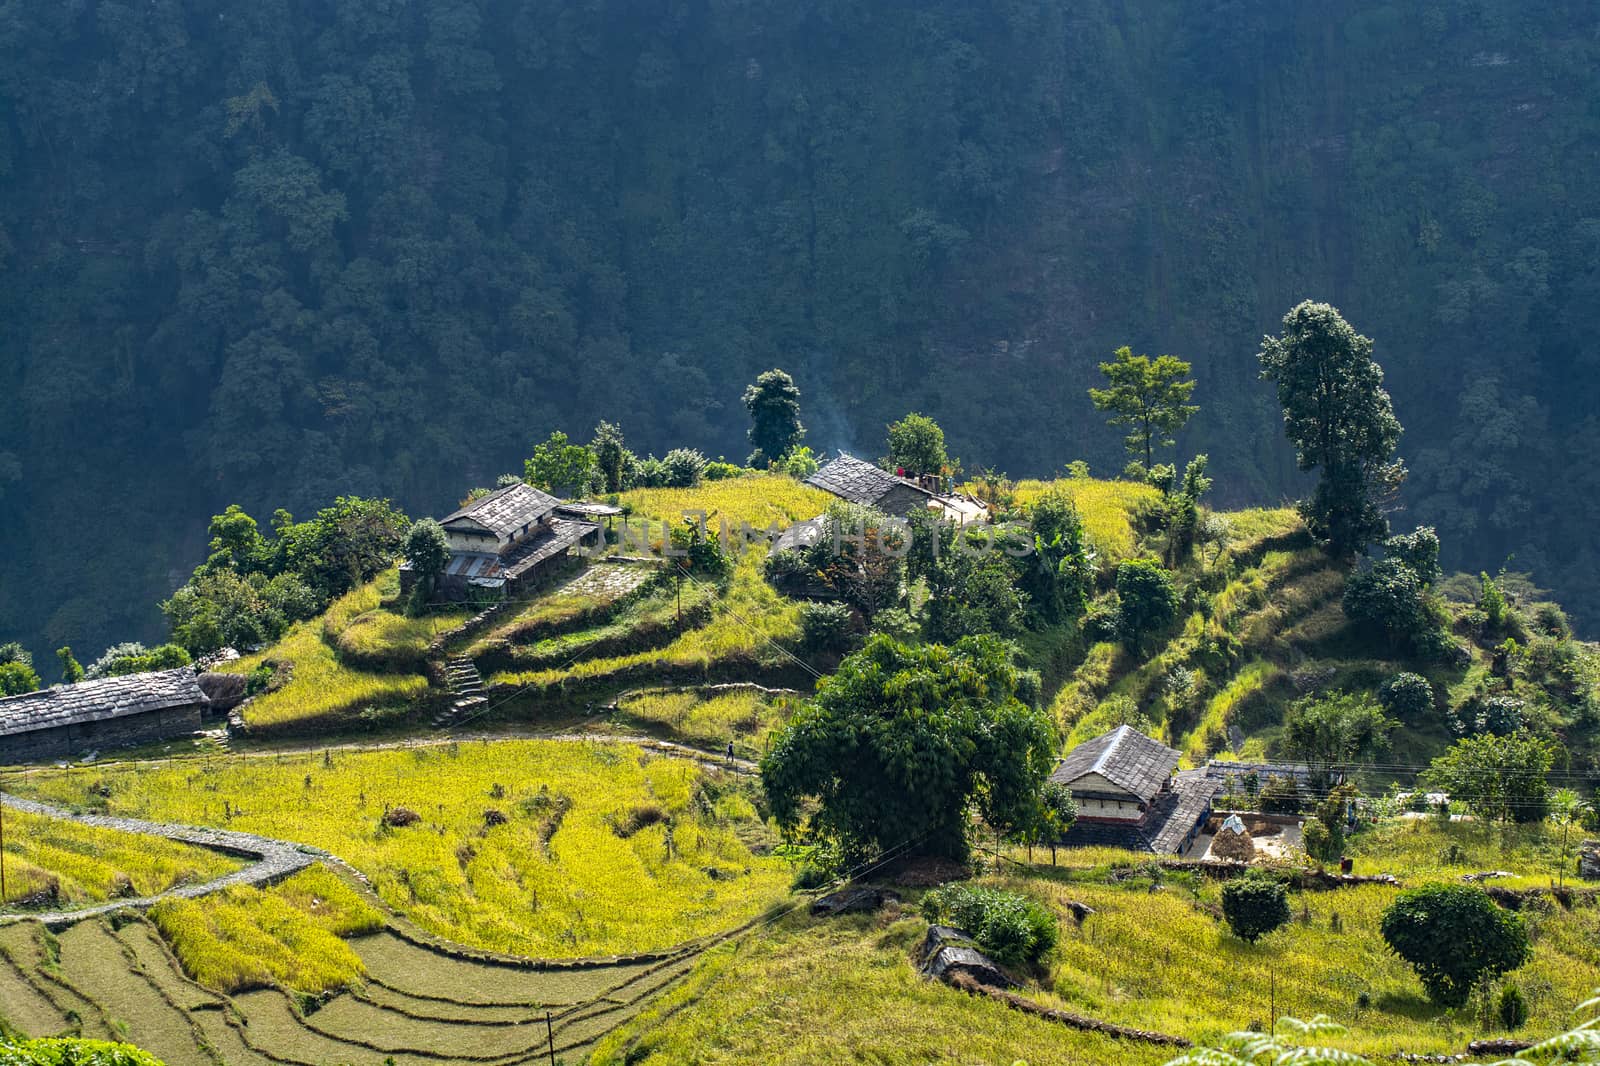 Rice field with houses on hill, Annapurna Conservation Area, Nepal